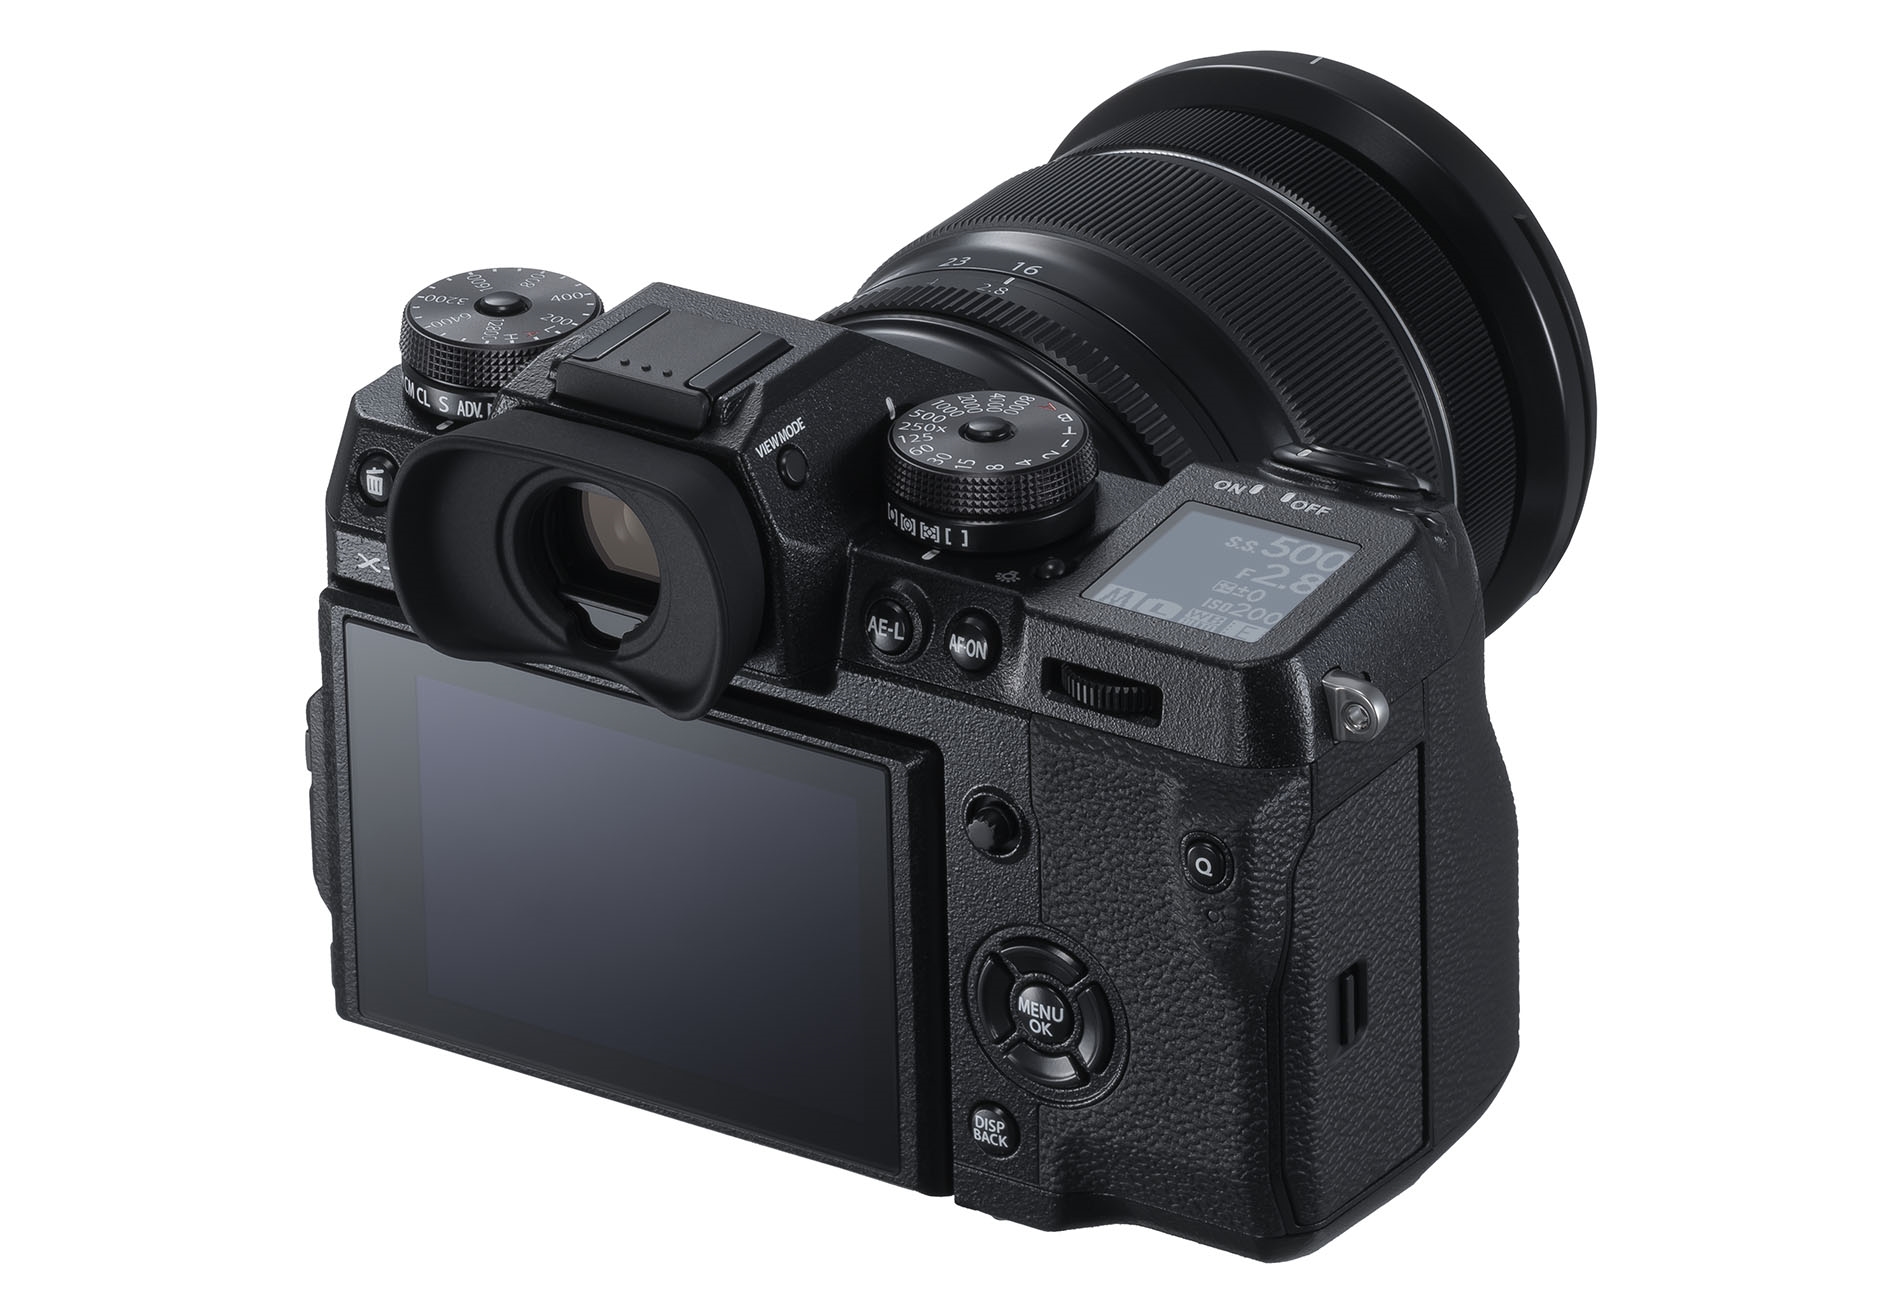 Fujfilm targets video shooters with the new flagship X-H1 | DeviceDaily.com